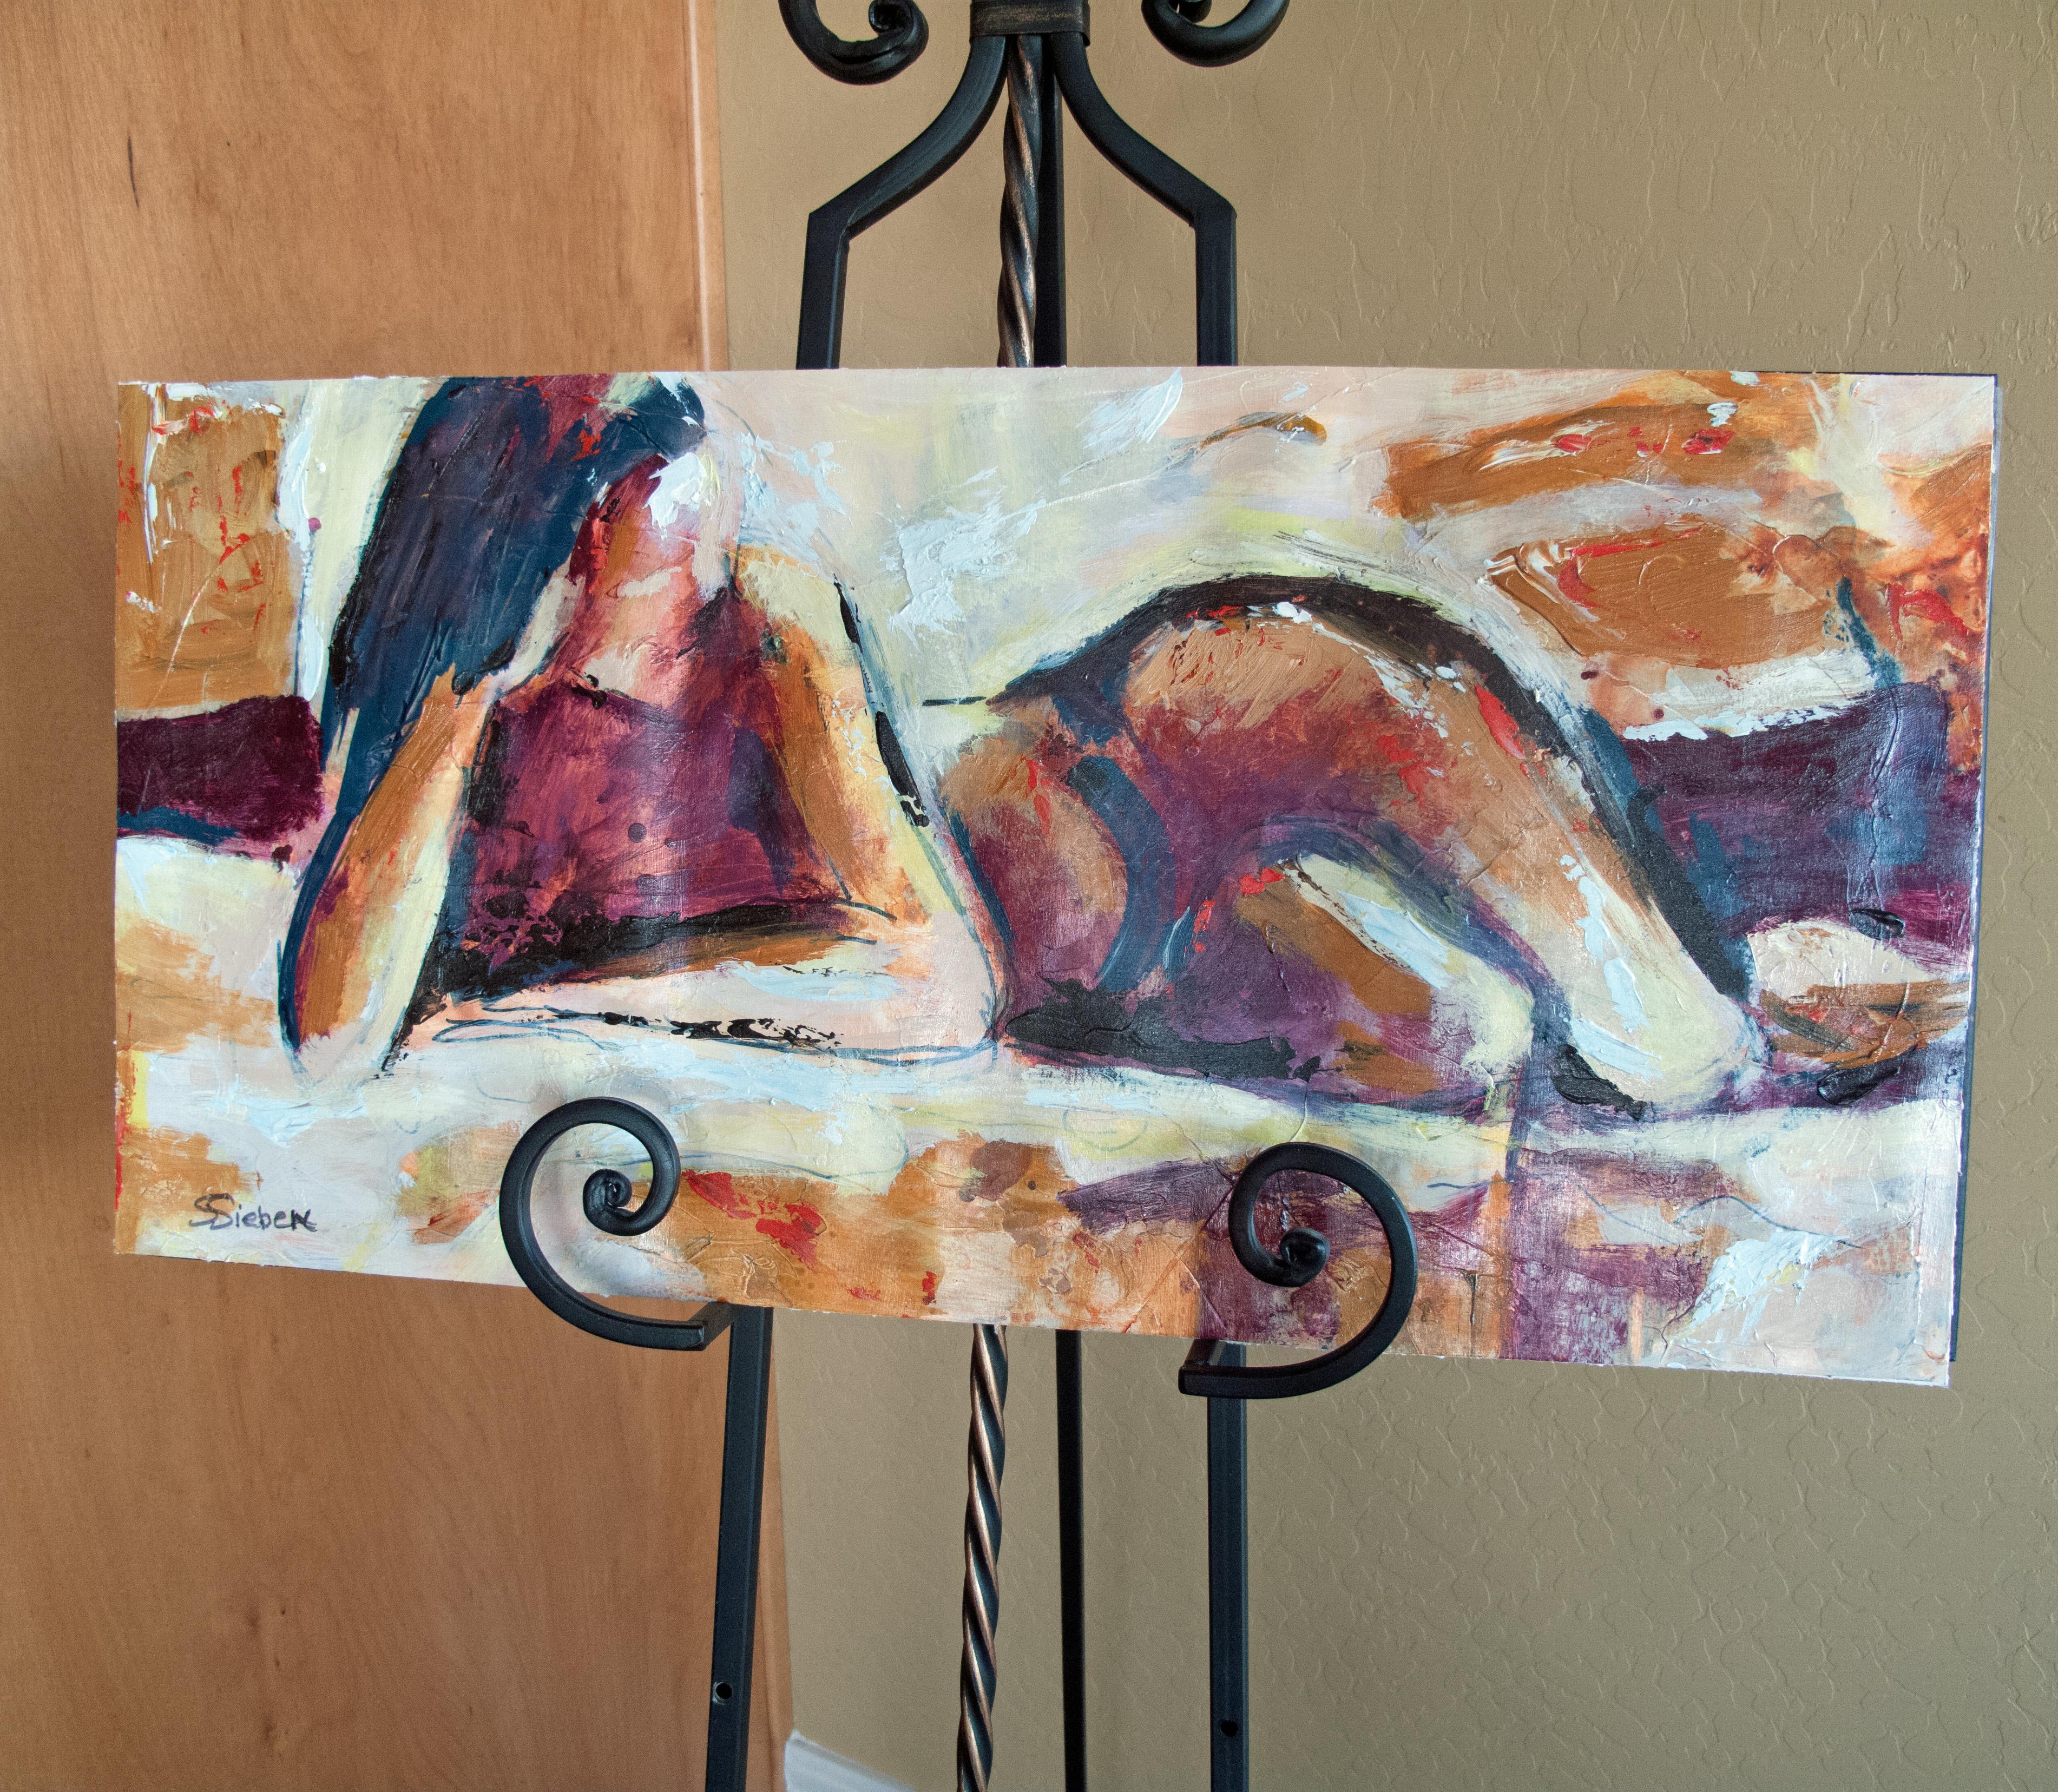 Reclining Nude - Abstract Expressionist Painting by Sharon Sieben